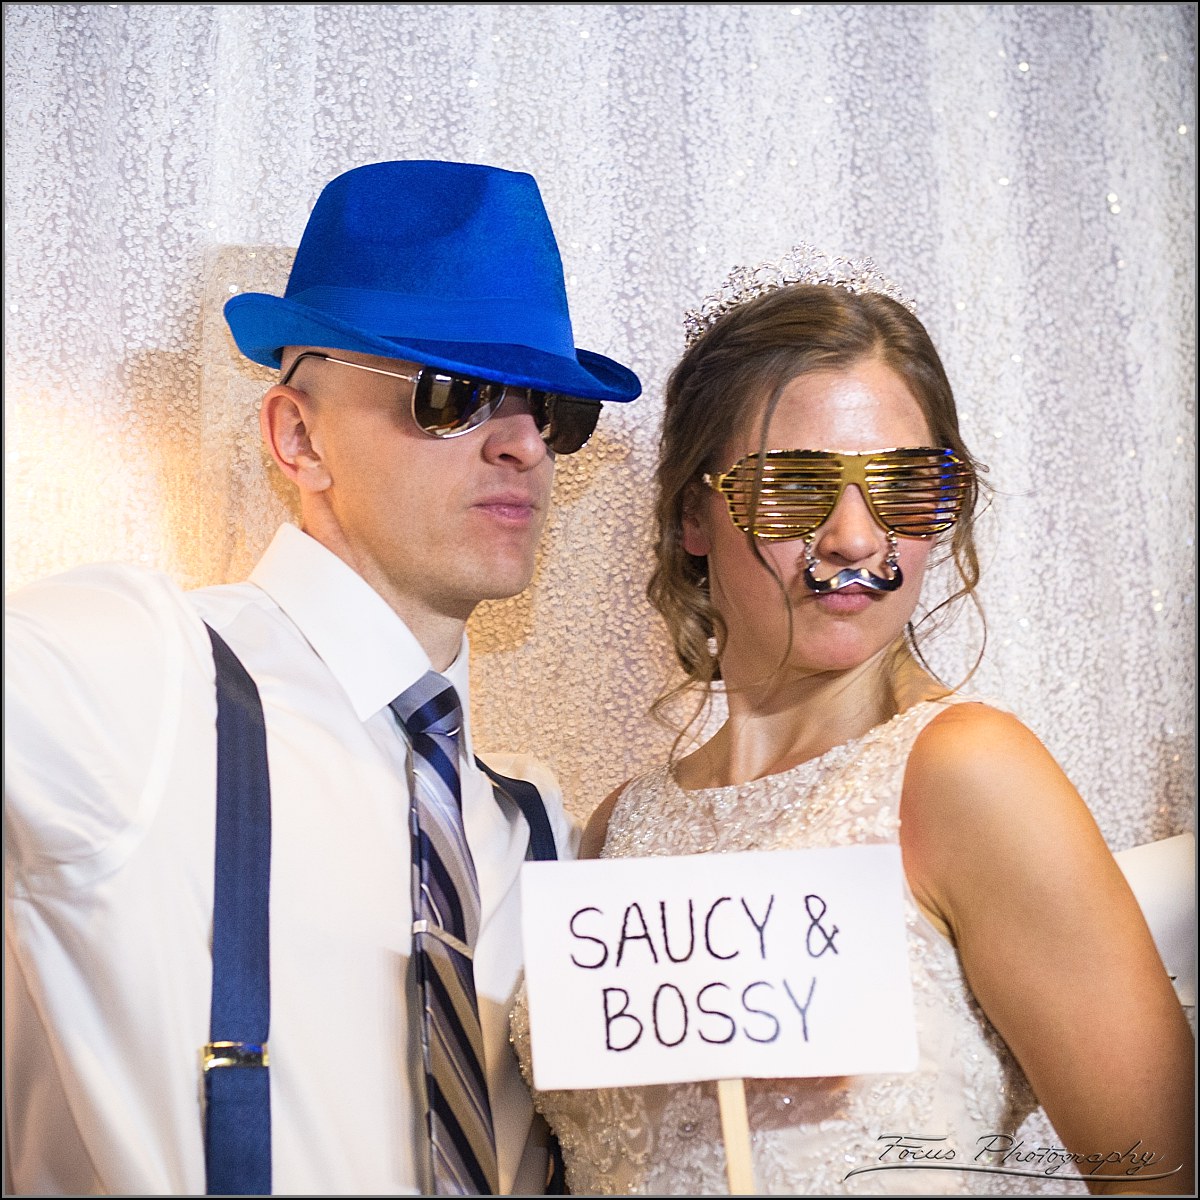 Saucy and bossy in photo booth